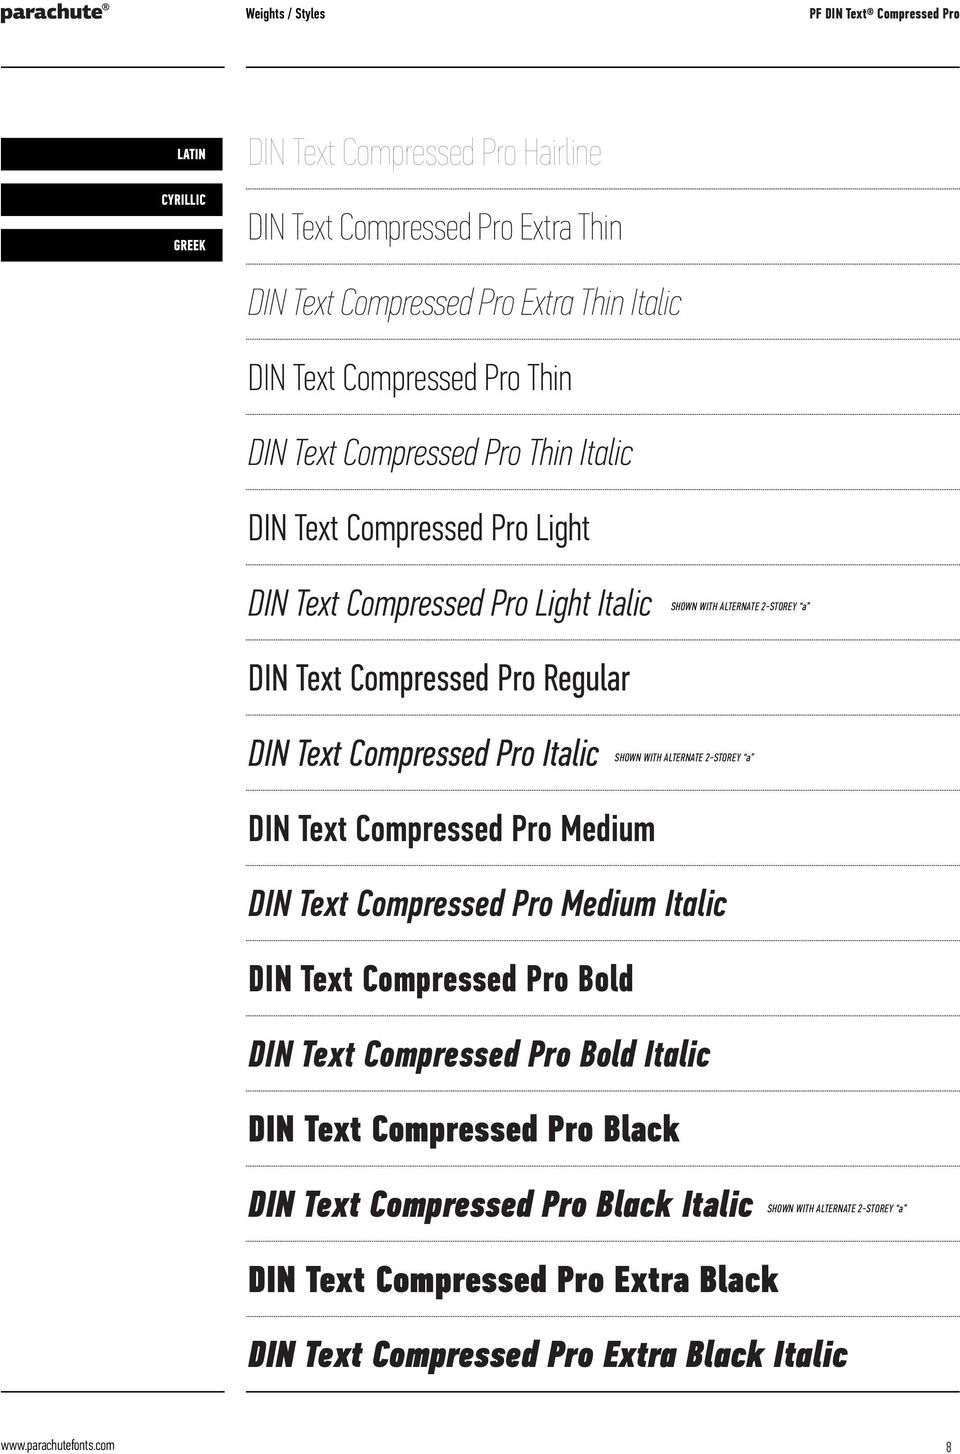 Compressed Pro Italic SHOWN WITH ALTERNATE 2-STOREY a DIN Text Compressed Pro Medium DIN Text Compressed Pro Medium Italic DIN Text Compressed Pro Bold DIN Text Compressed Pro